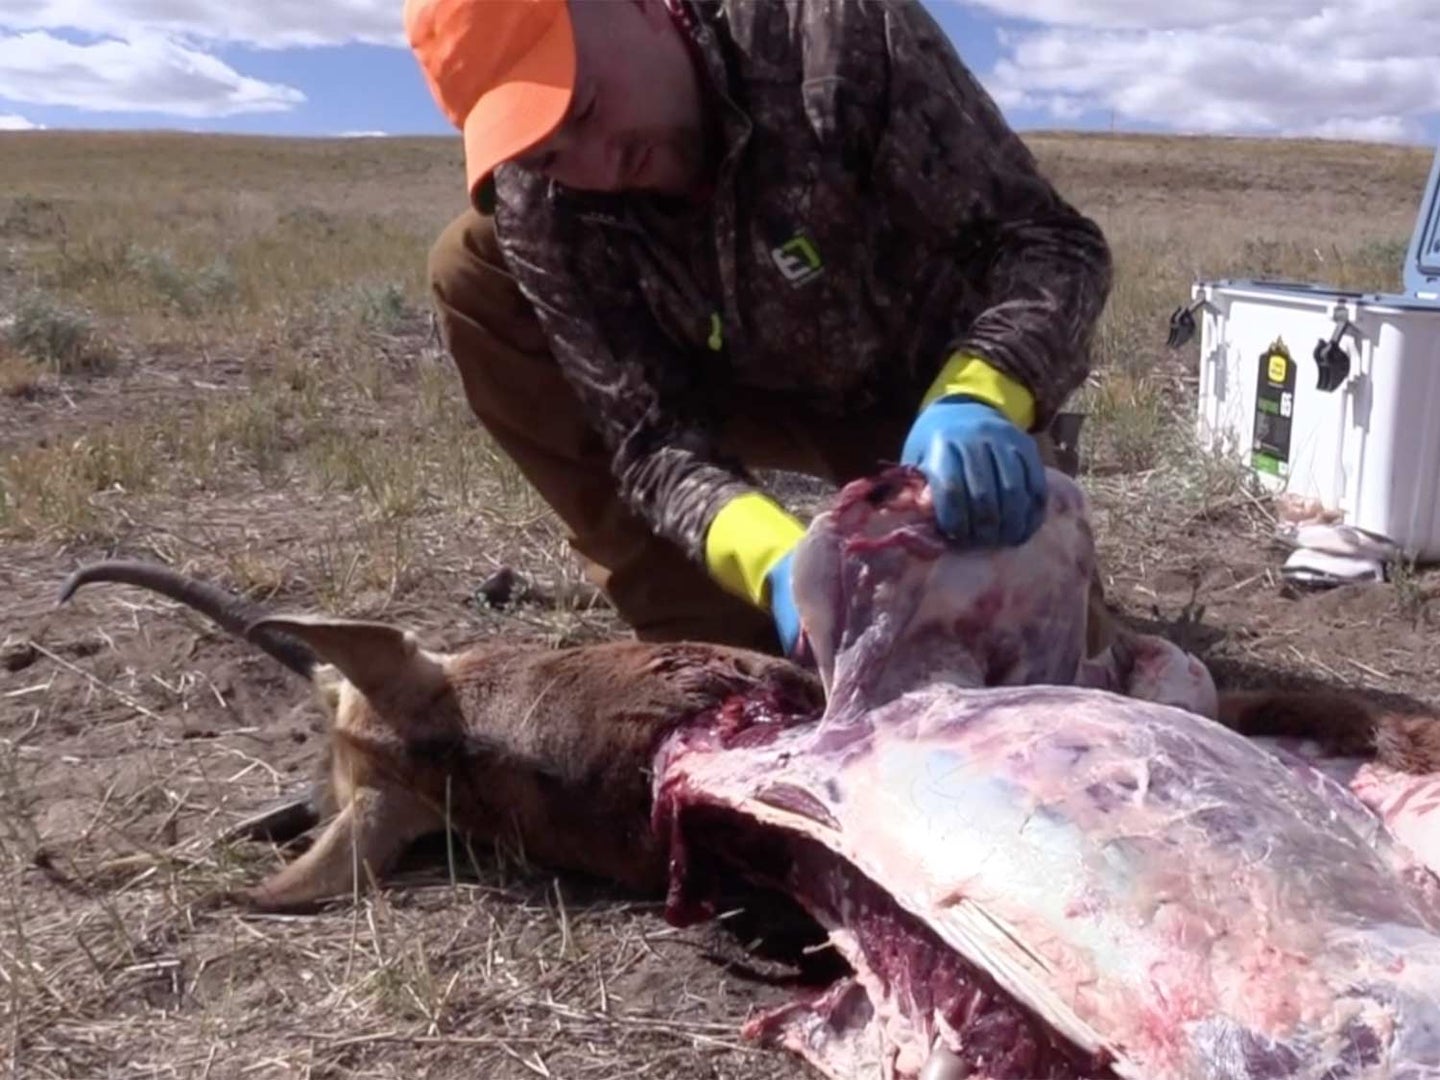 A hunter butchers and skins an antelope in a large open plain.